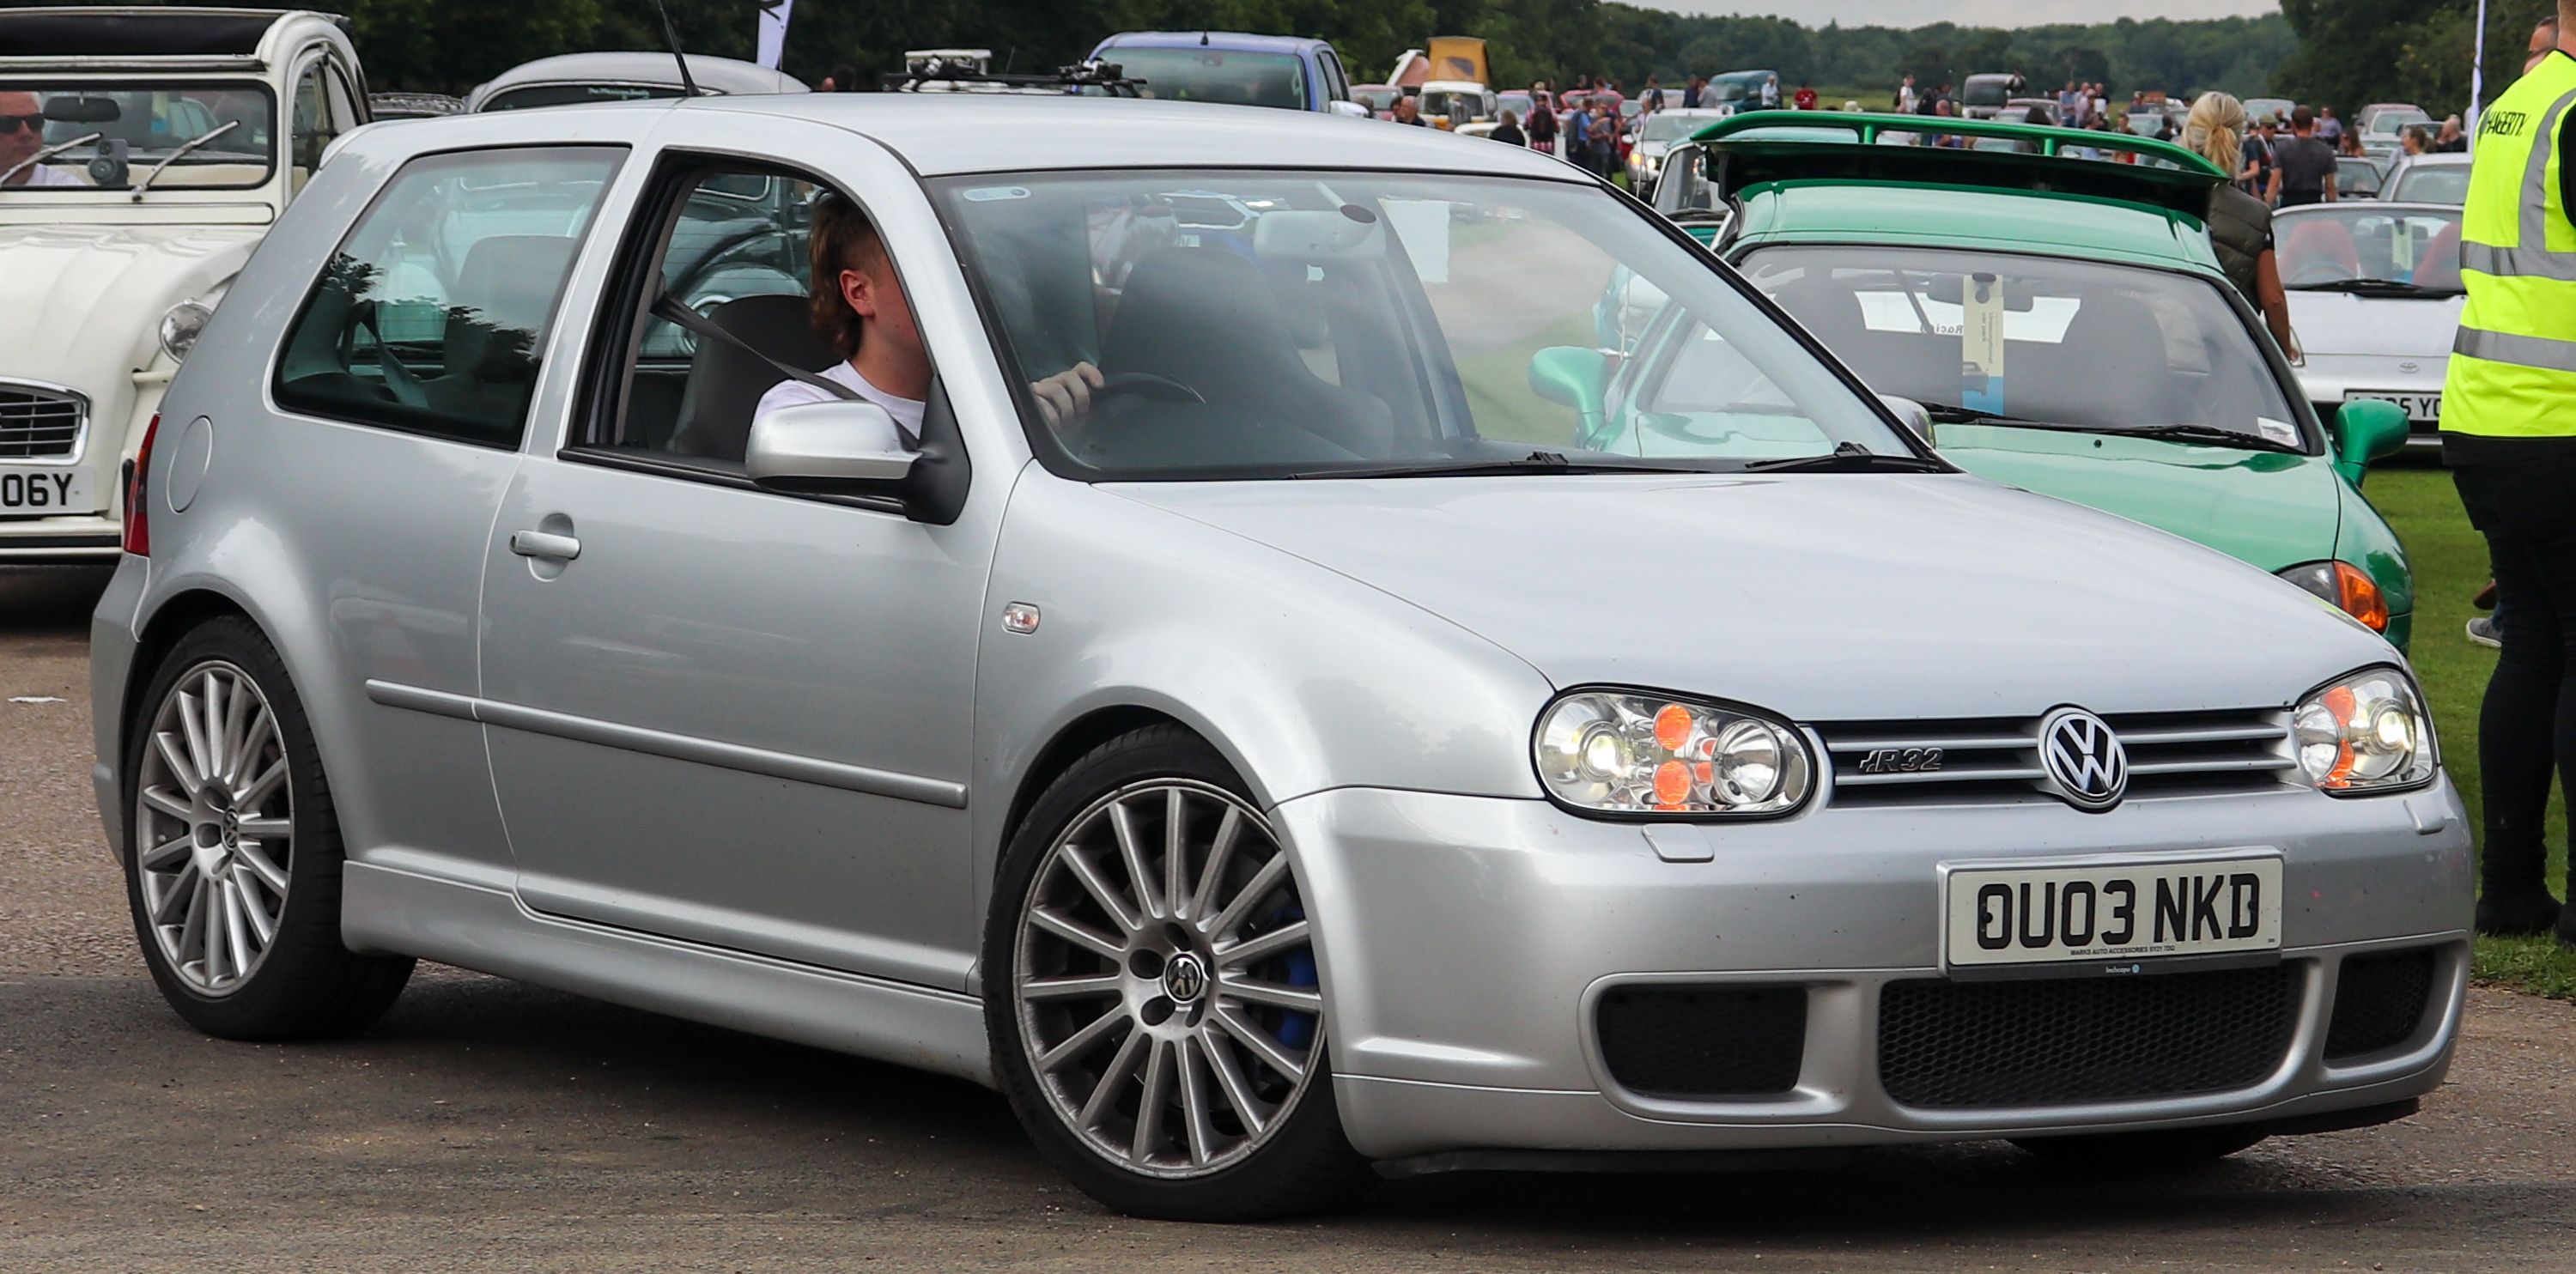 2004 Volkswagen Mk4 Golf R32 Used Car Review